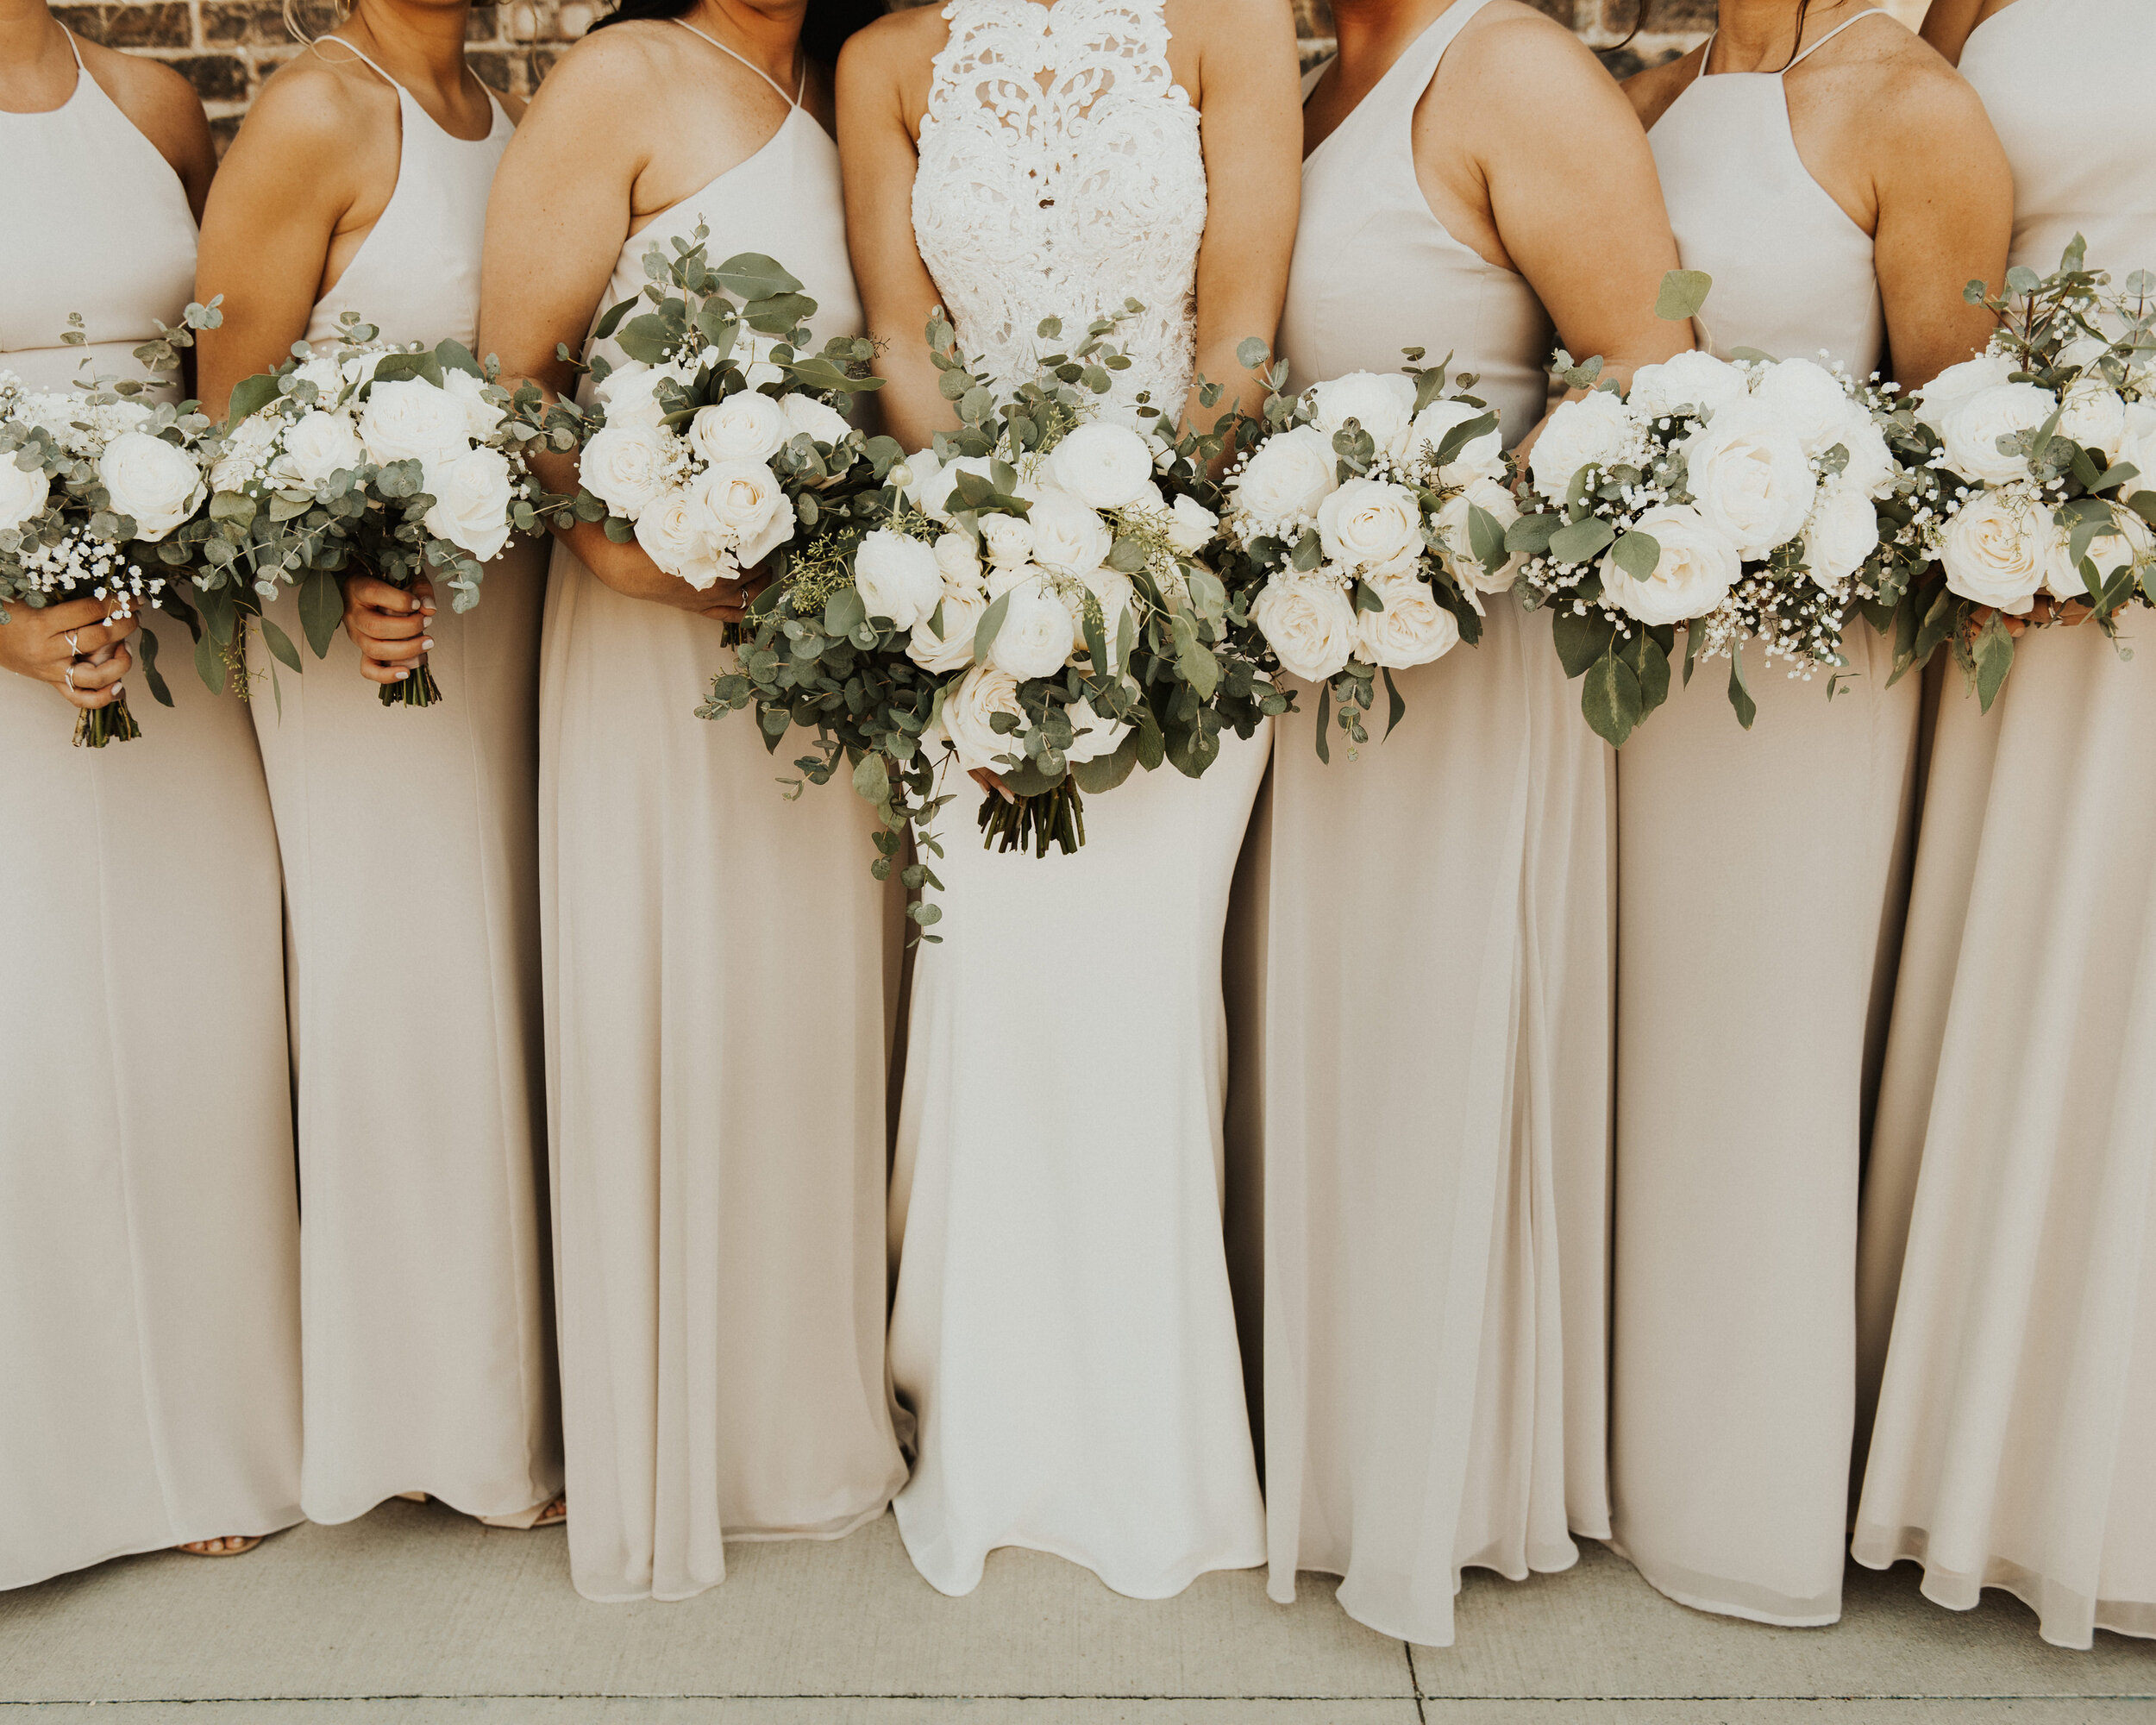 Modern, Yet Classic Fall Wedding at Company 251 featured on CHI thee WED